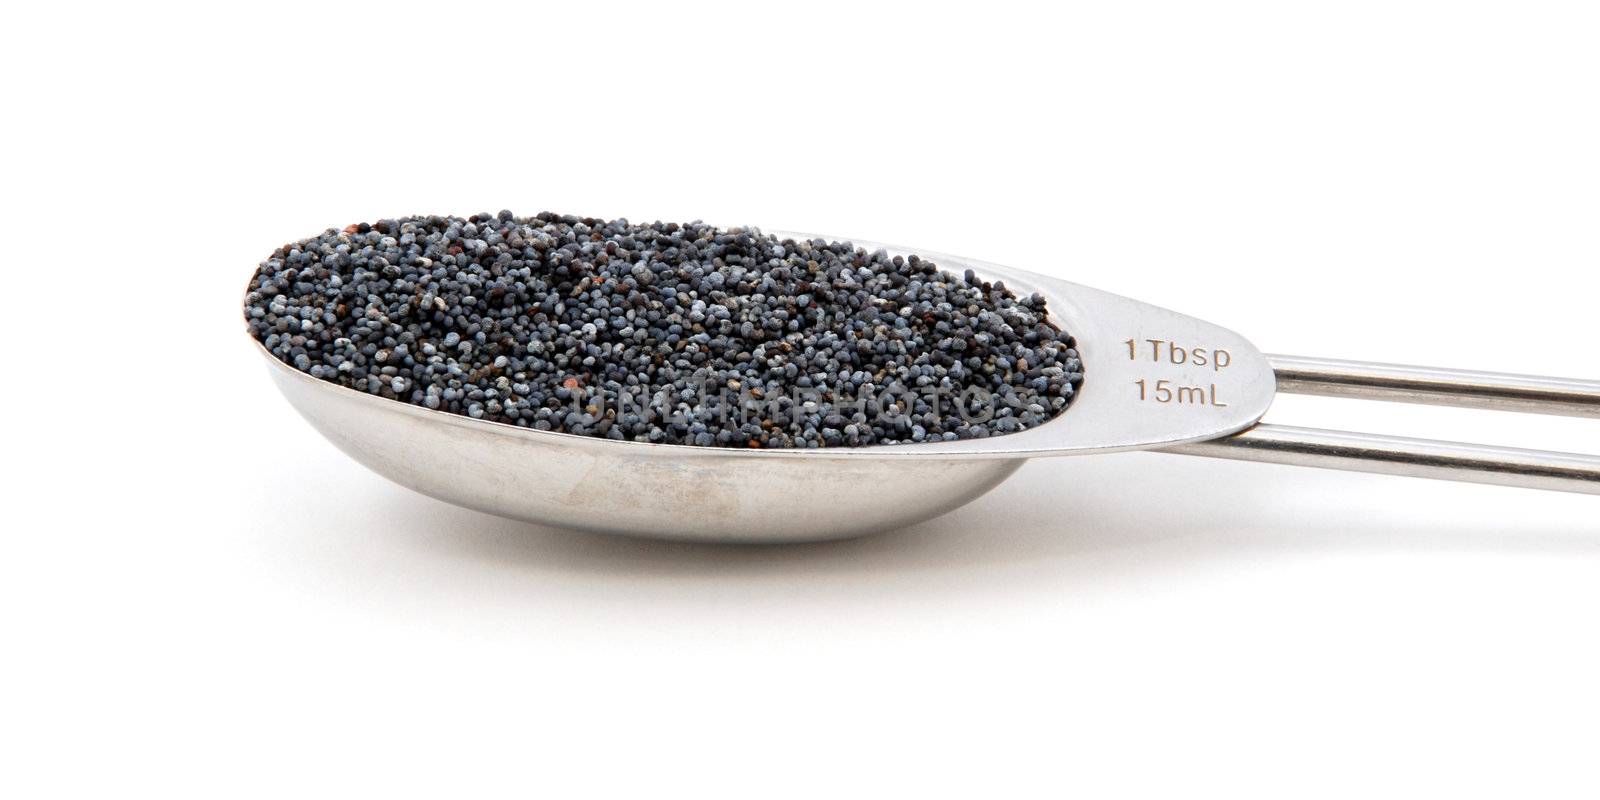 Poppy seeds measured in a metal tablespoon, isolated on a white background